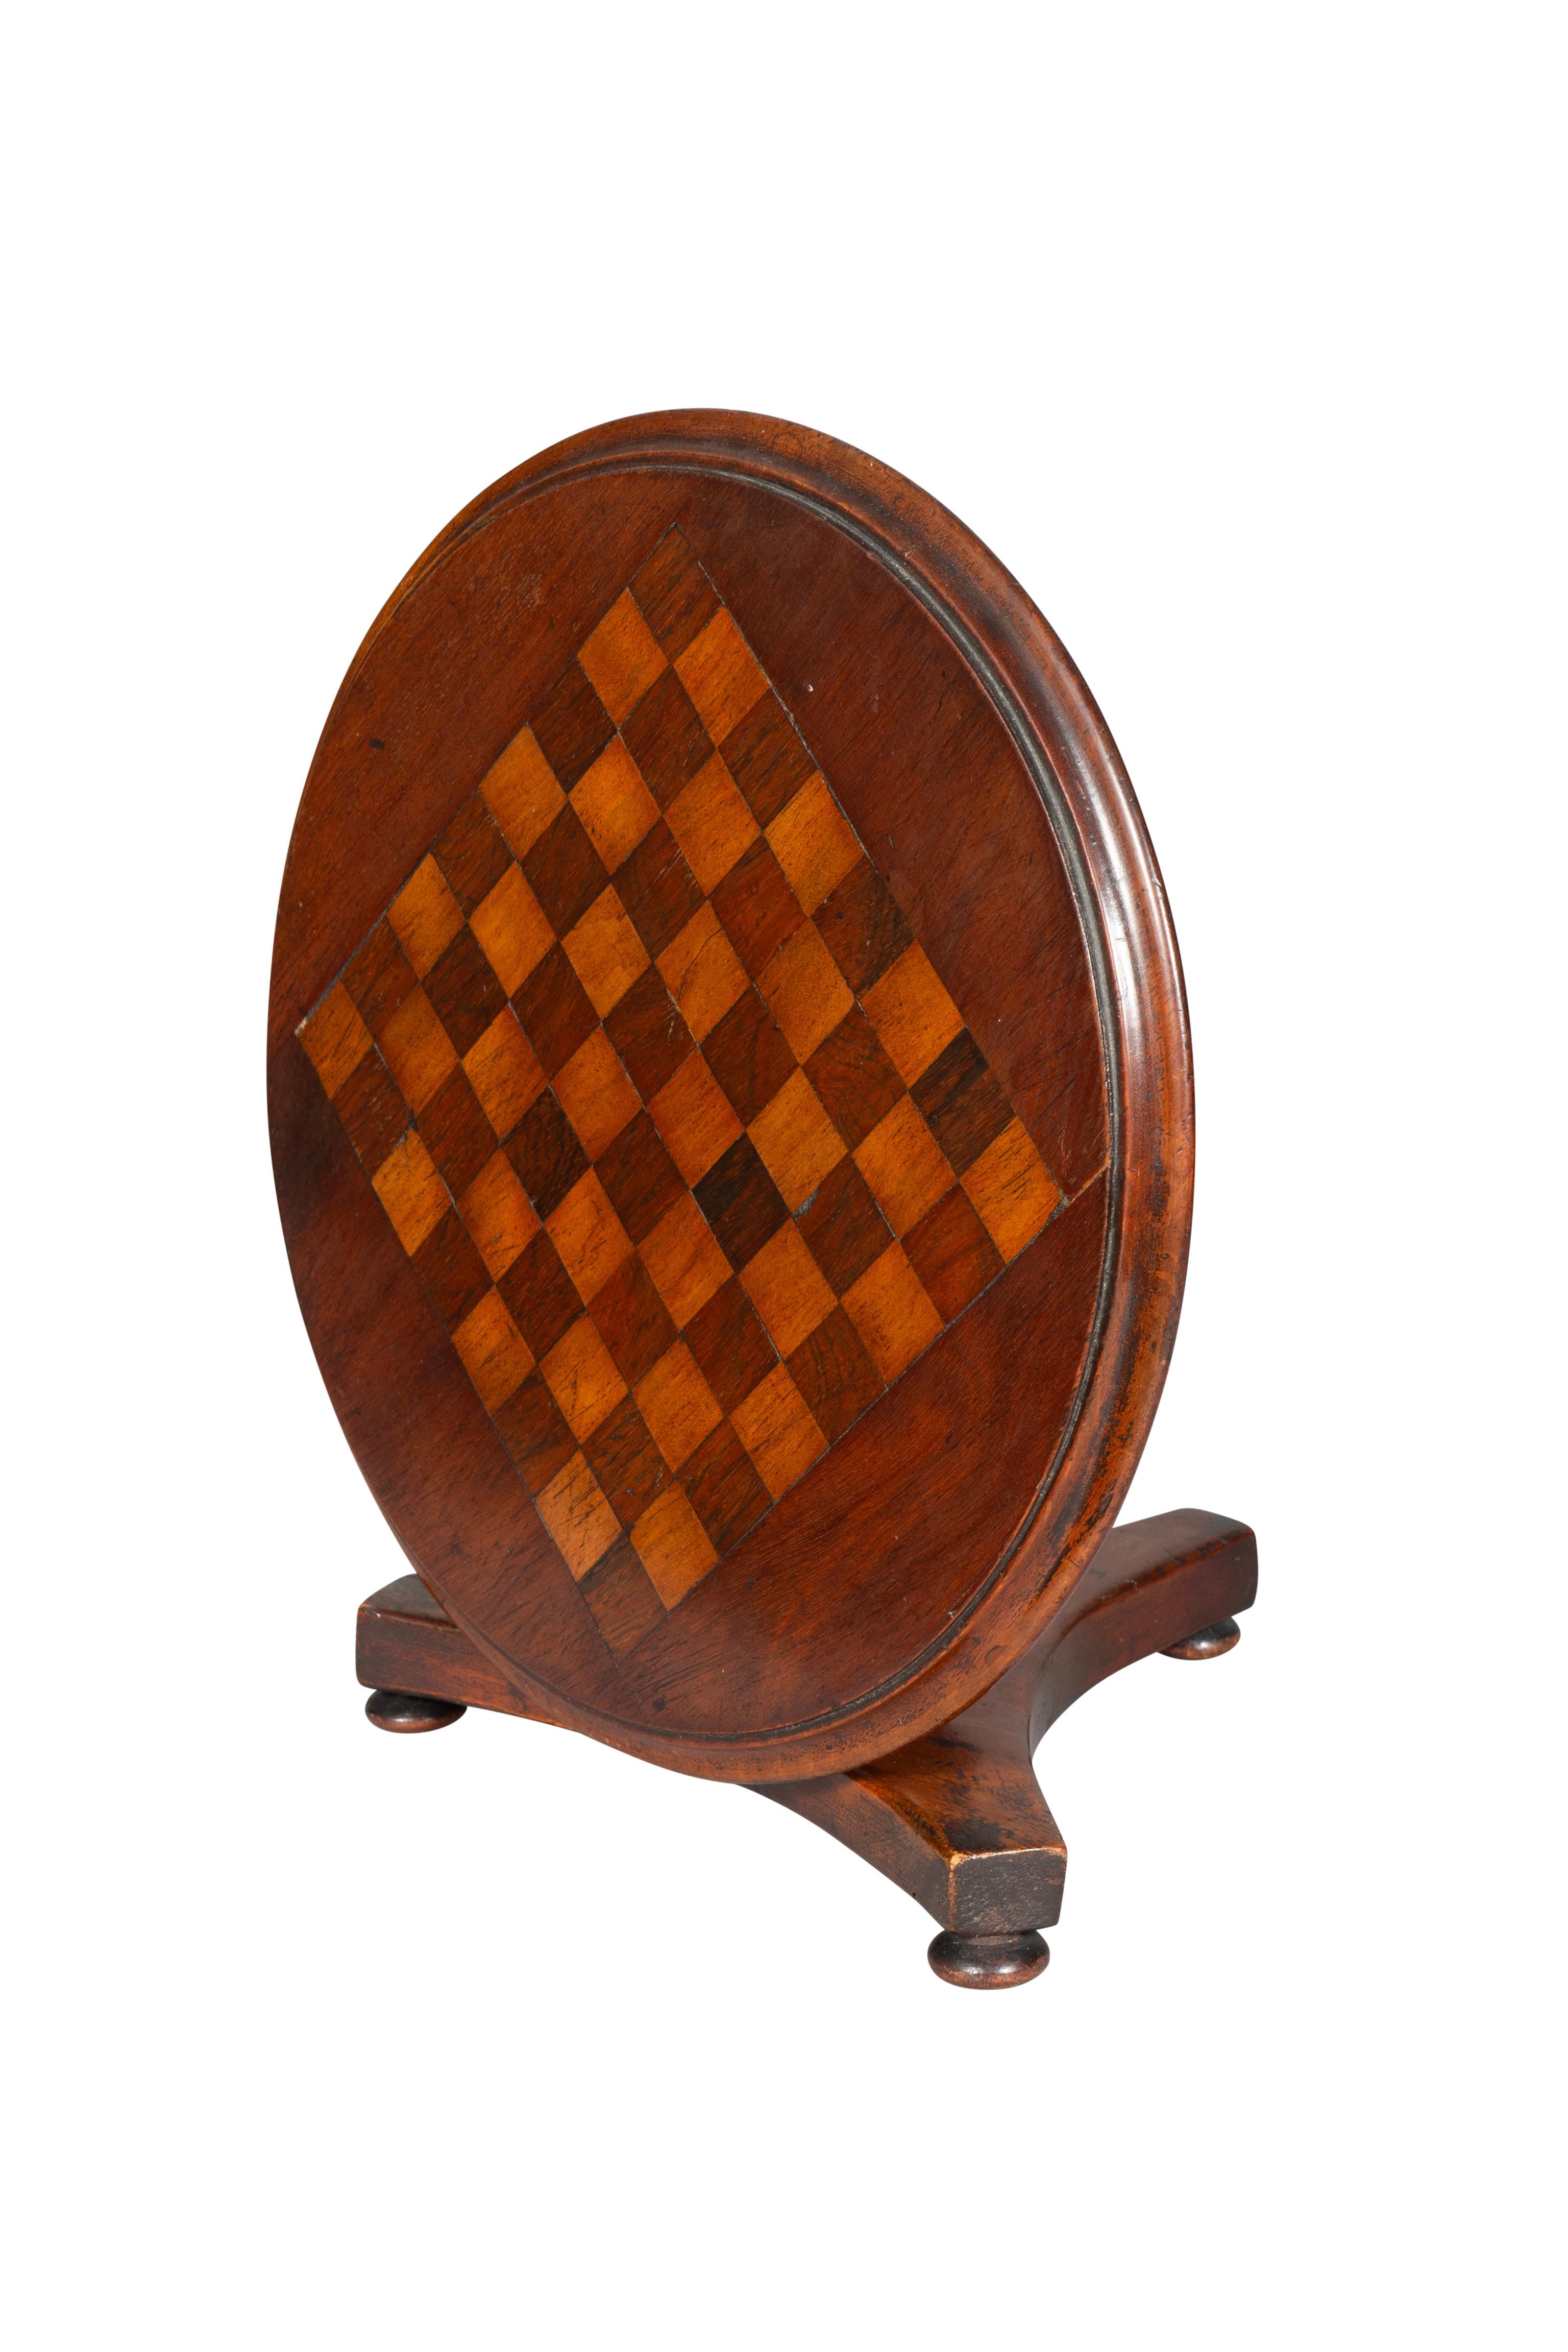 Early Victorian Mahogany Candle Riser In The Form Of A Games Table For Sale 1